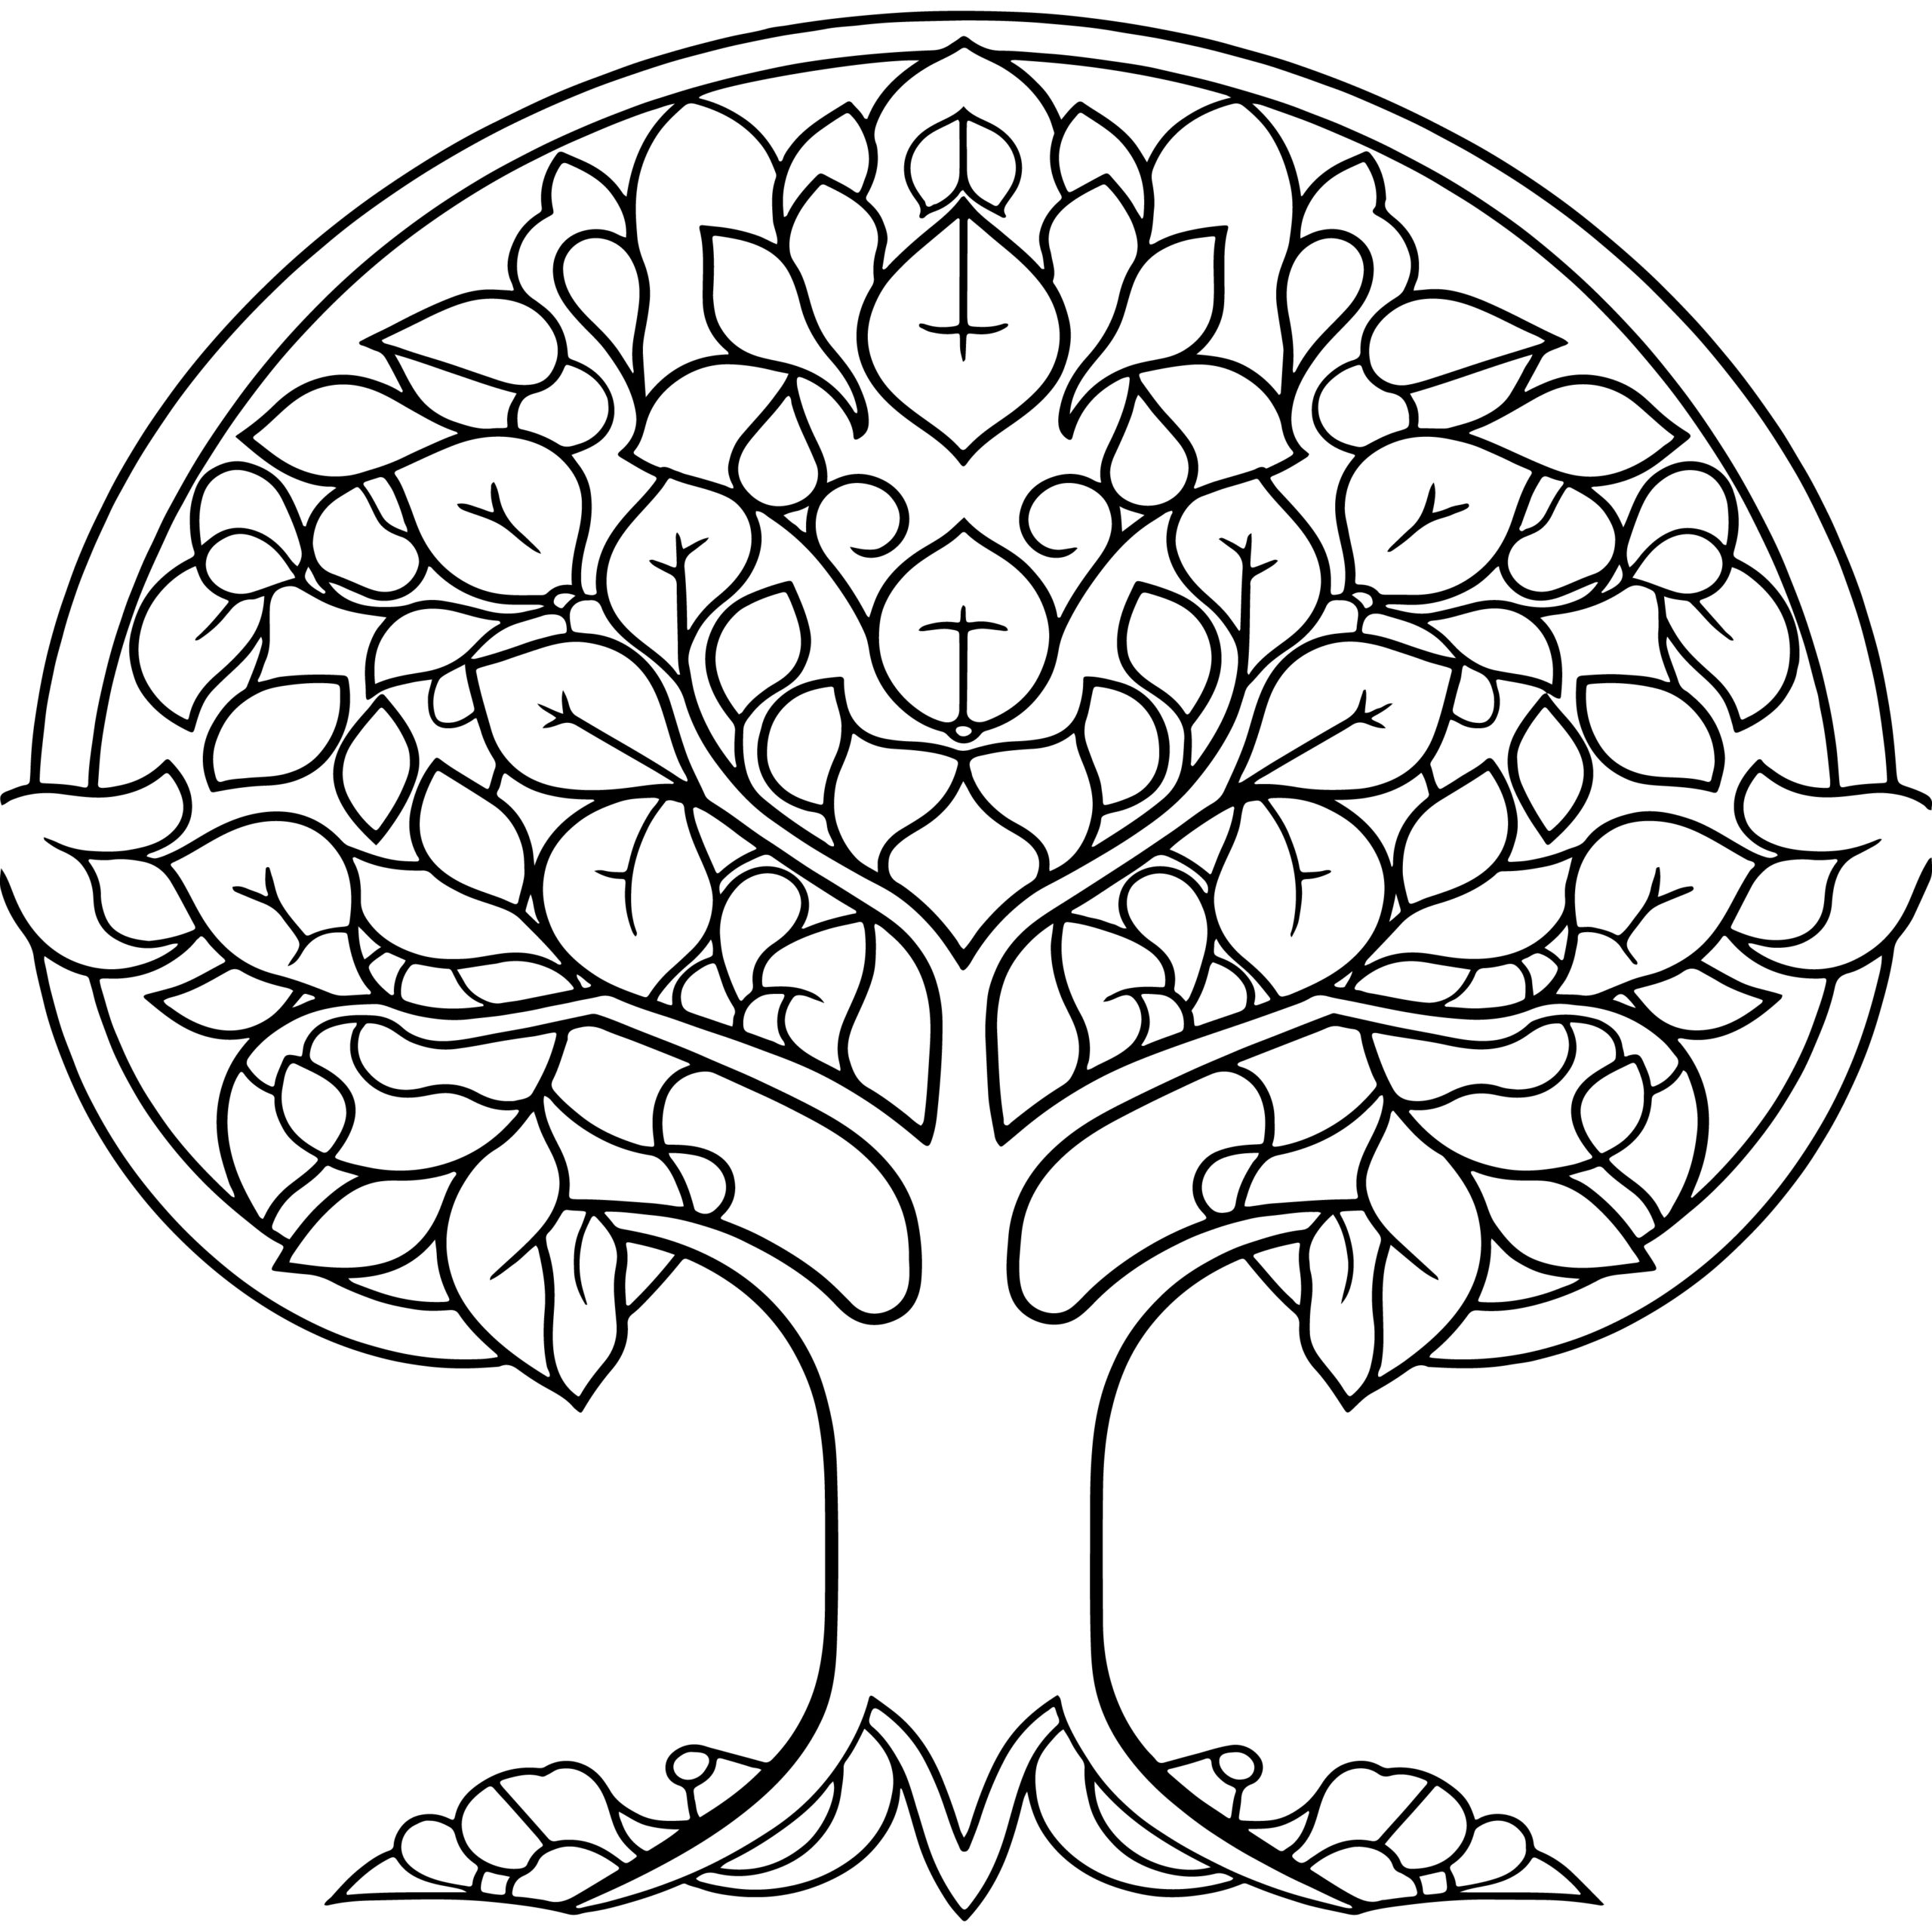 Tree coloring book for adult forests and trees adult colouring images made by teachers